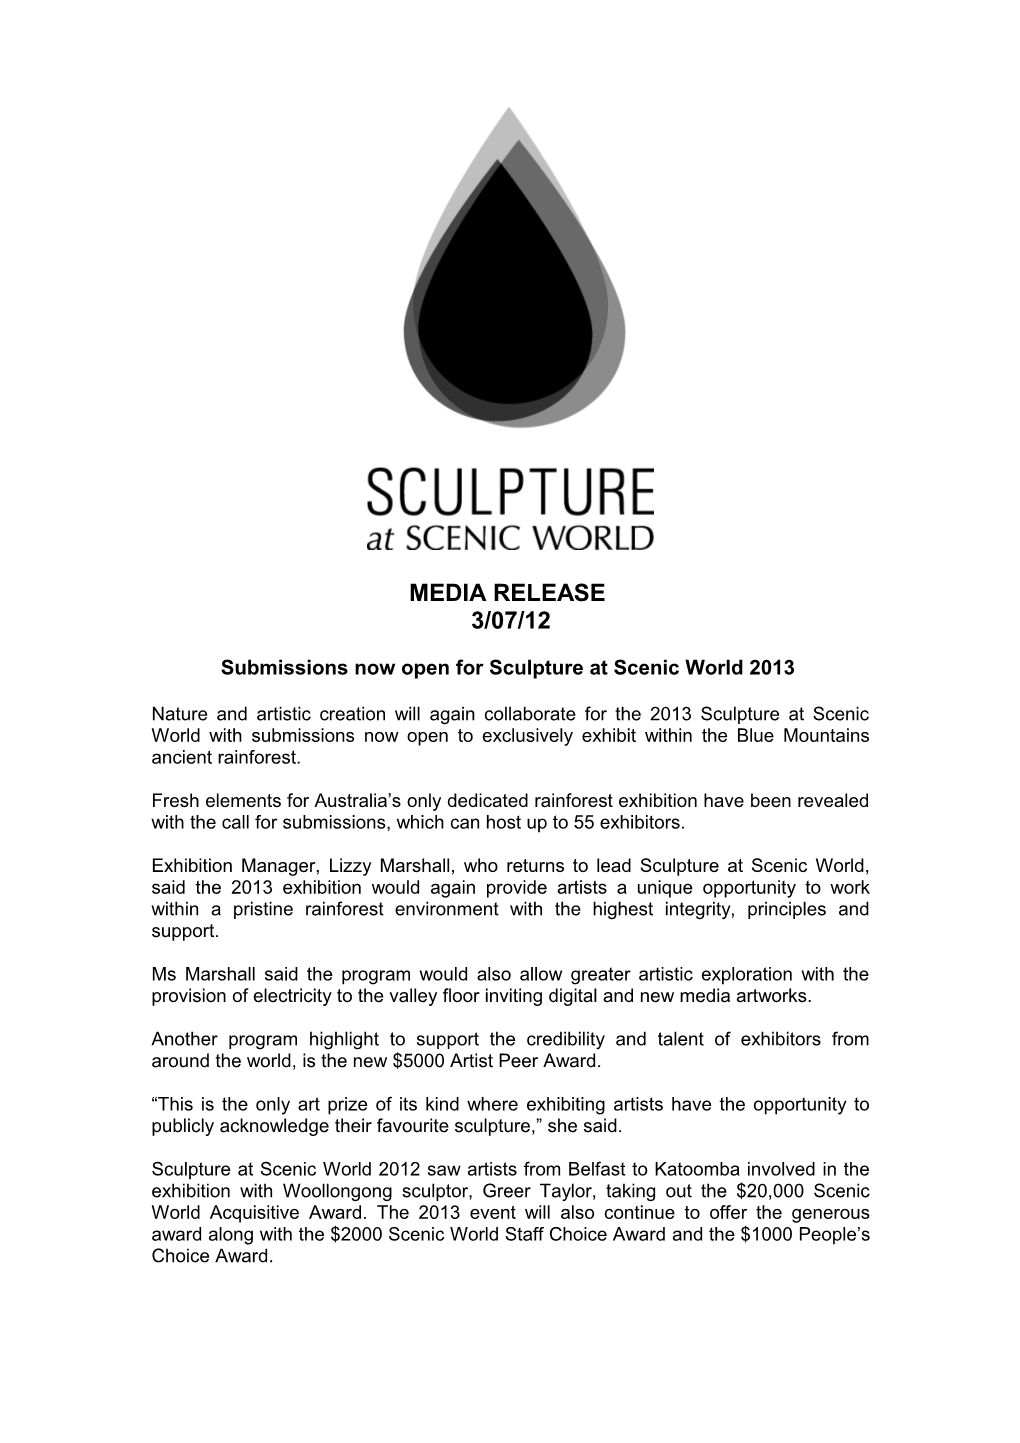 Submissions Now Open for Sculpture at Scenic World 2013